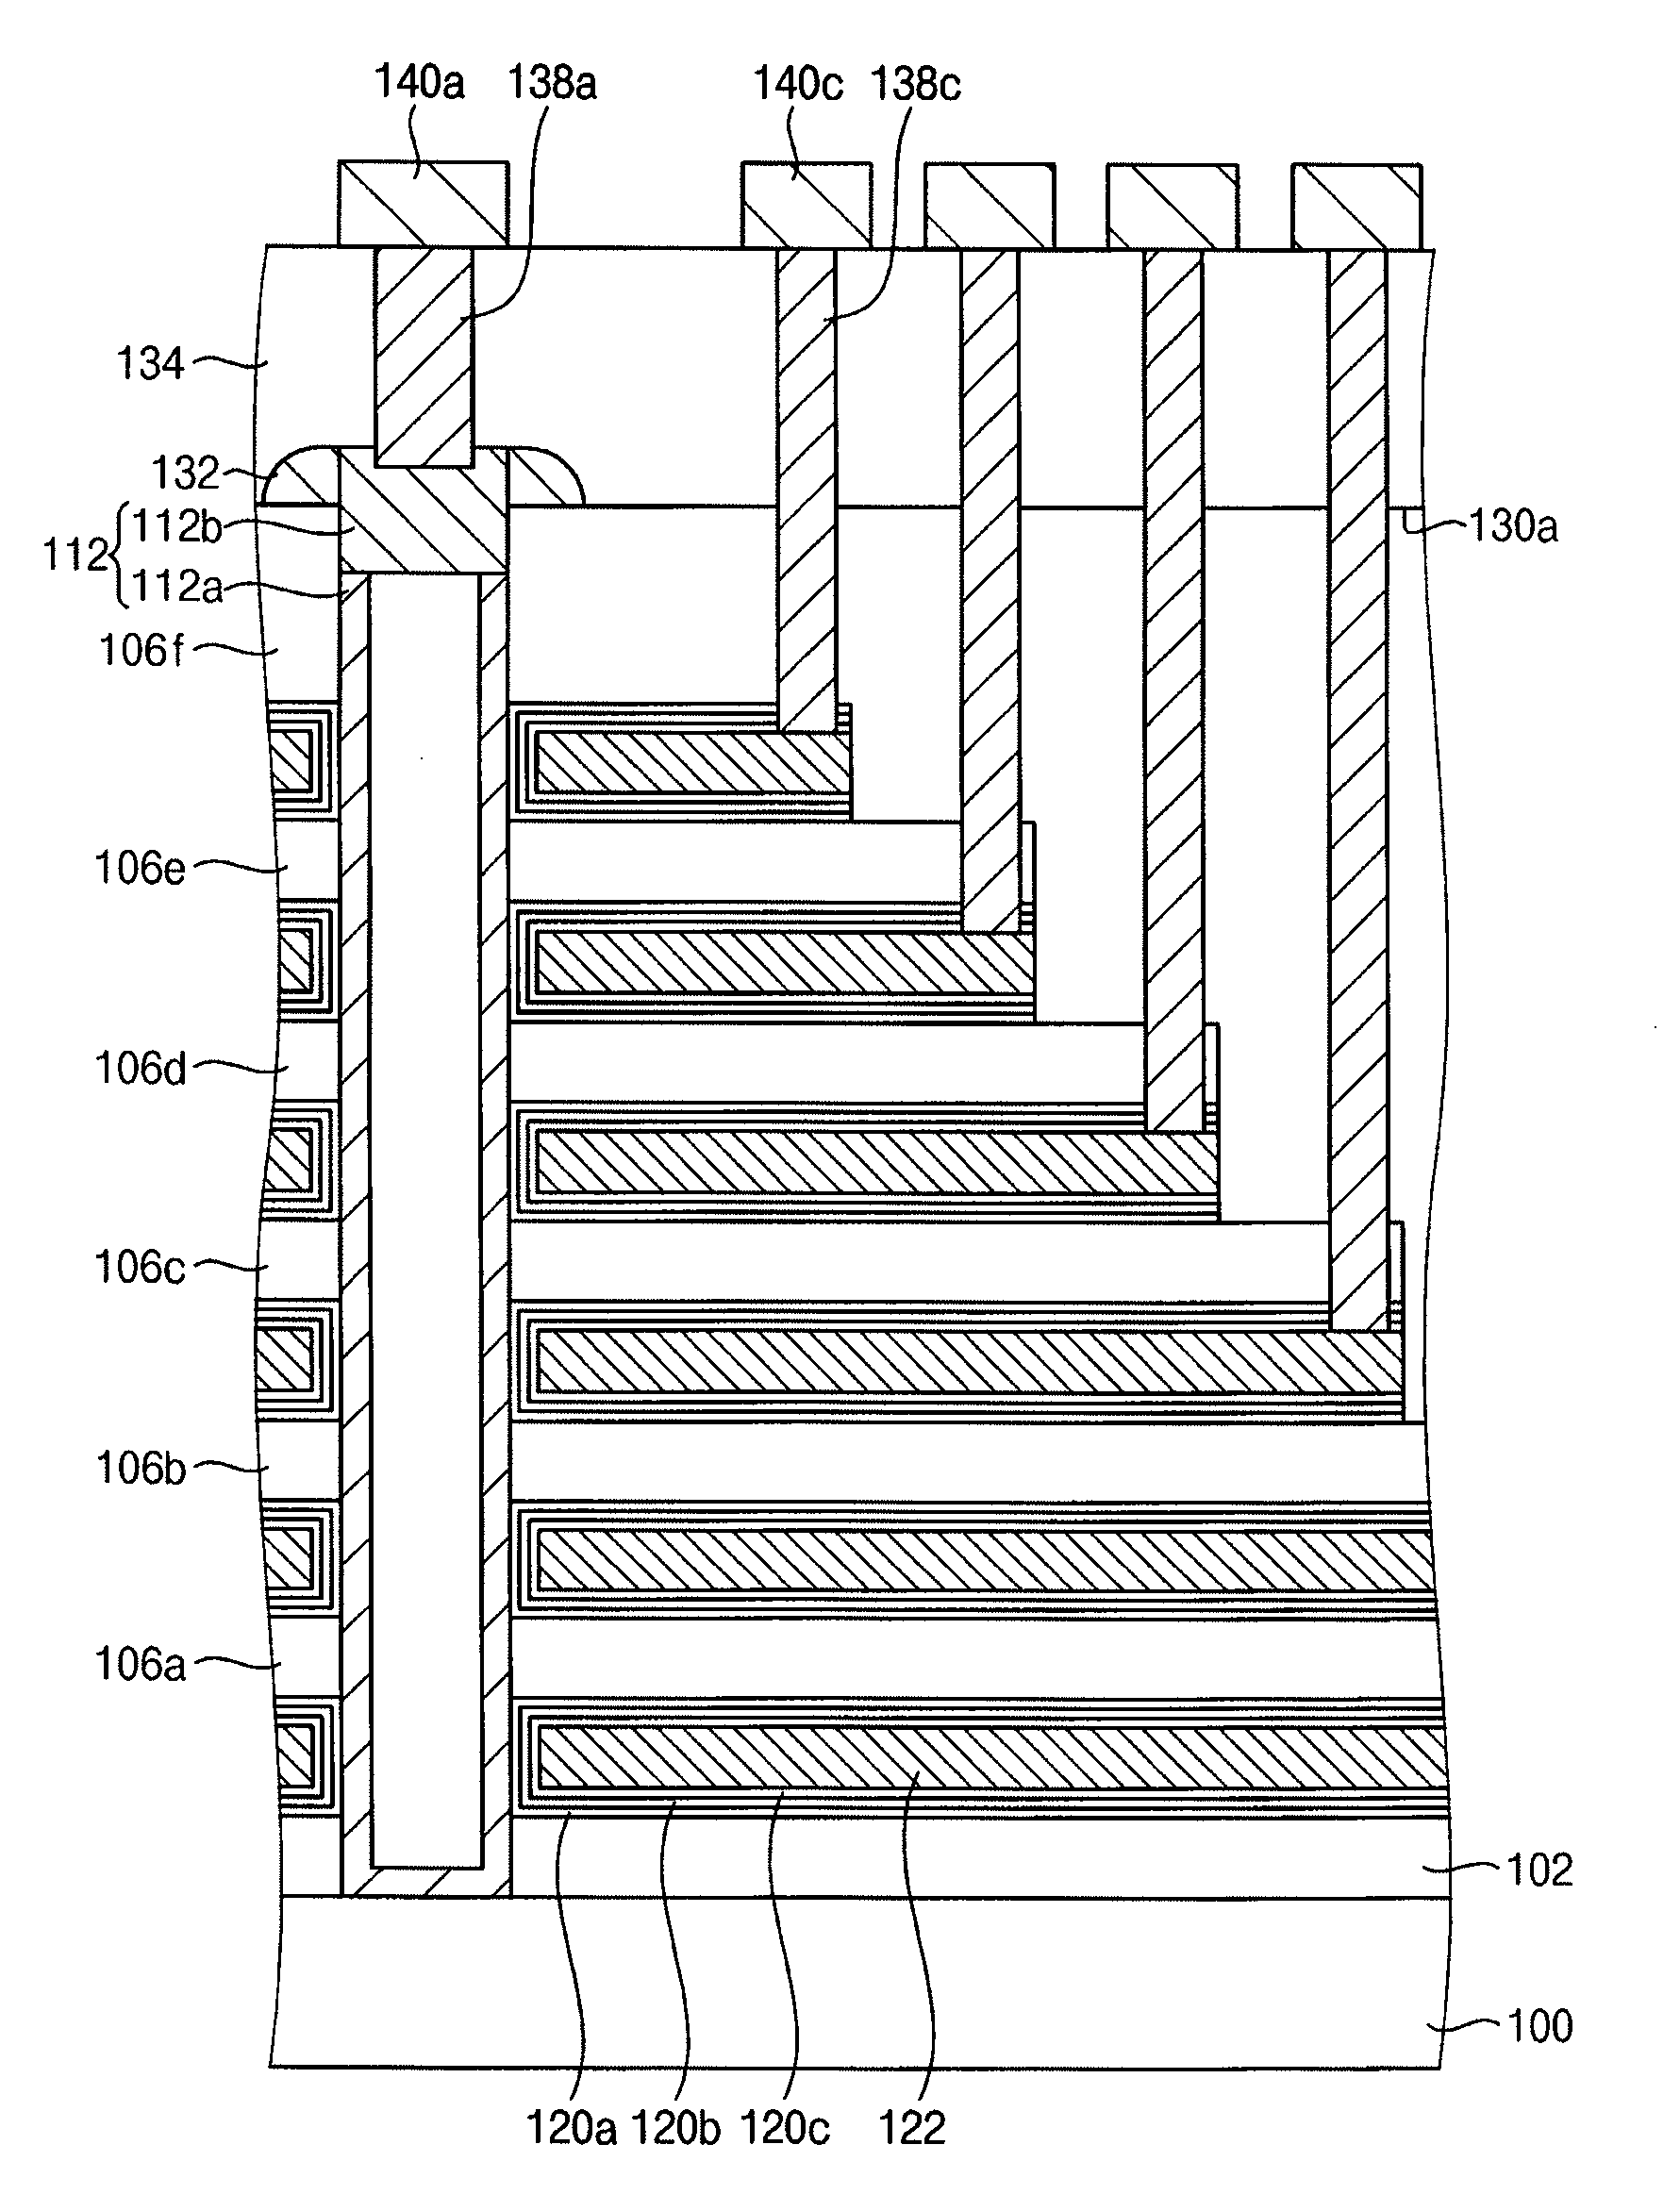 Manufacturing semiconductor devices